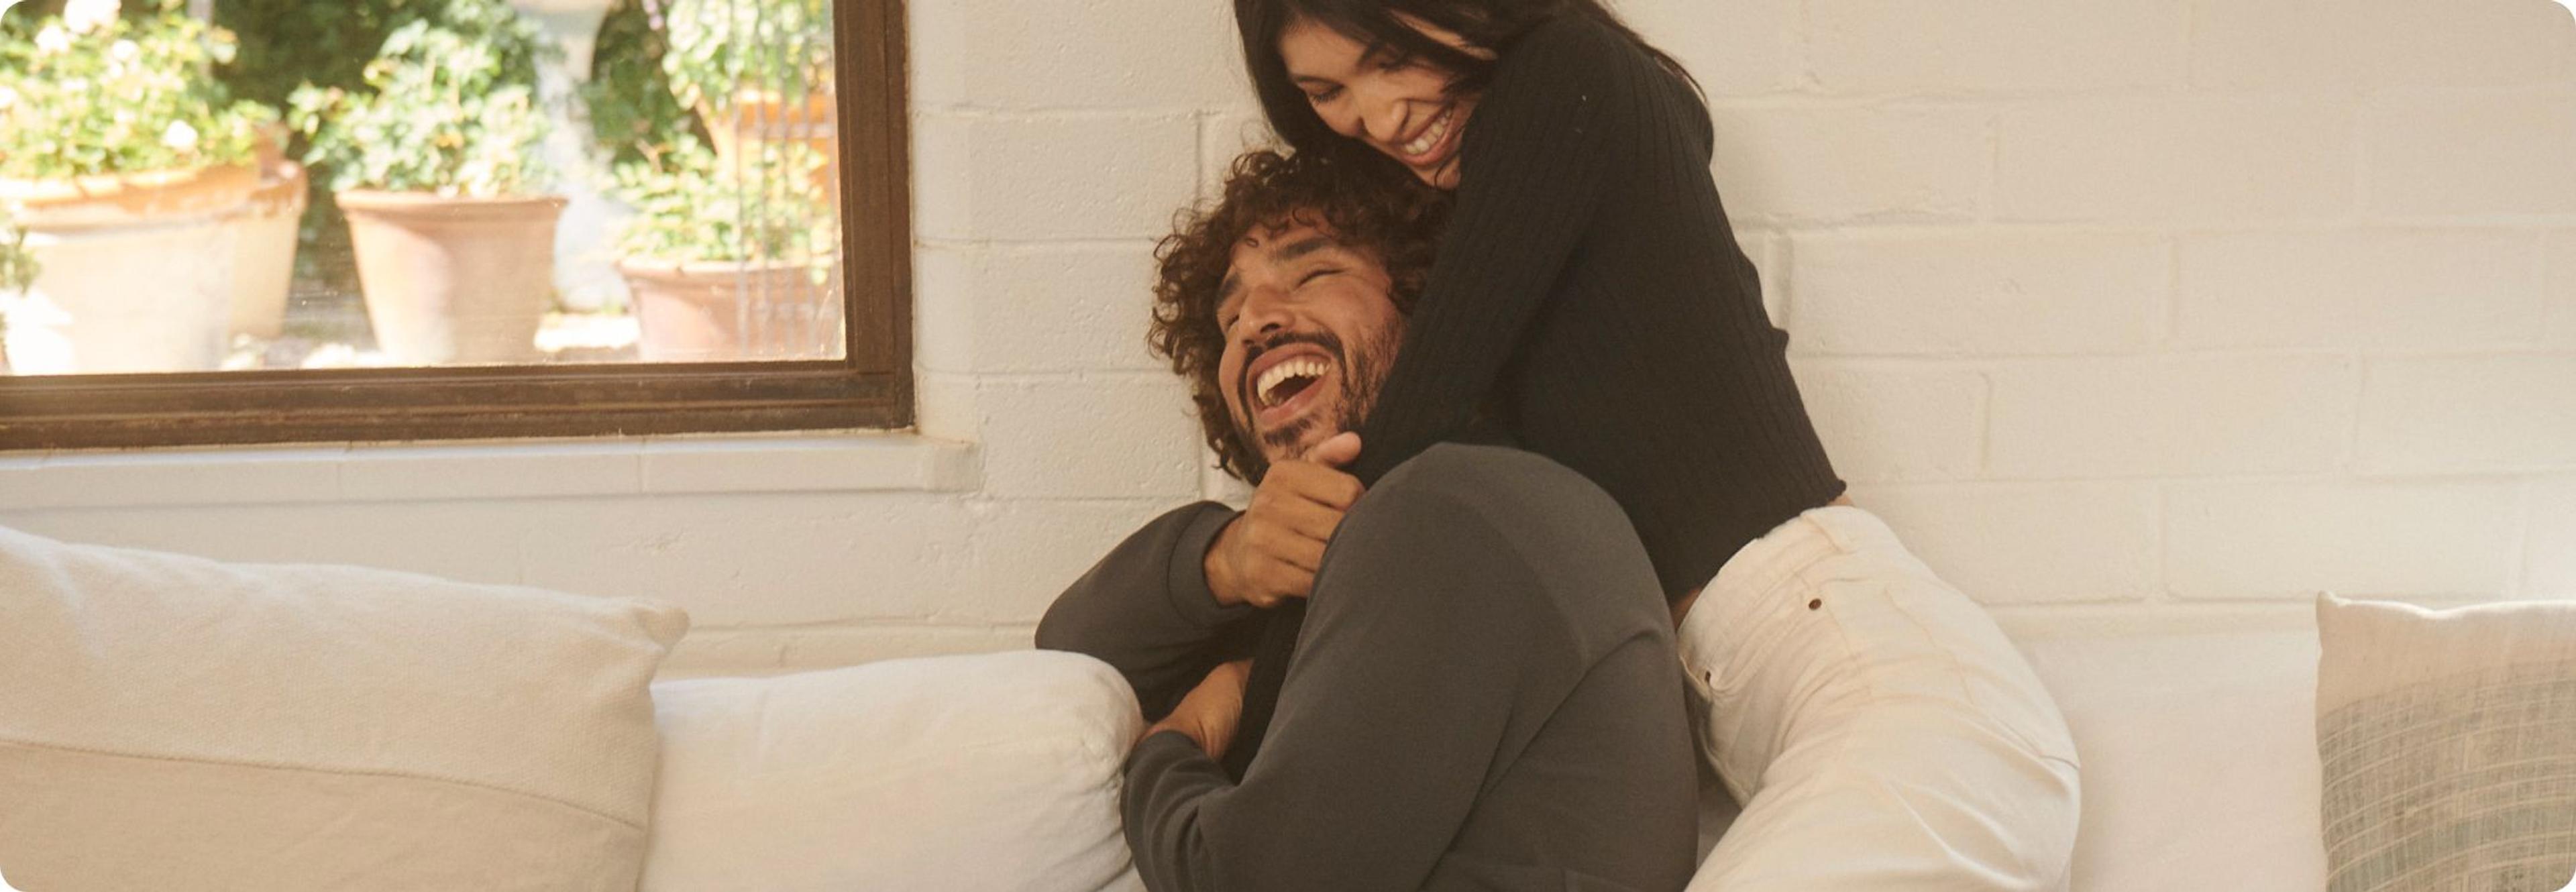  a man and a women hugging and laughing on a couch